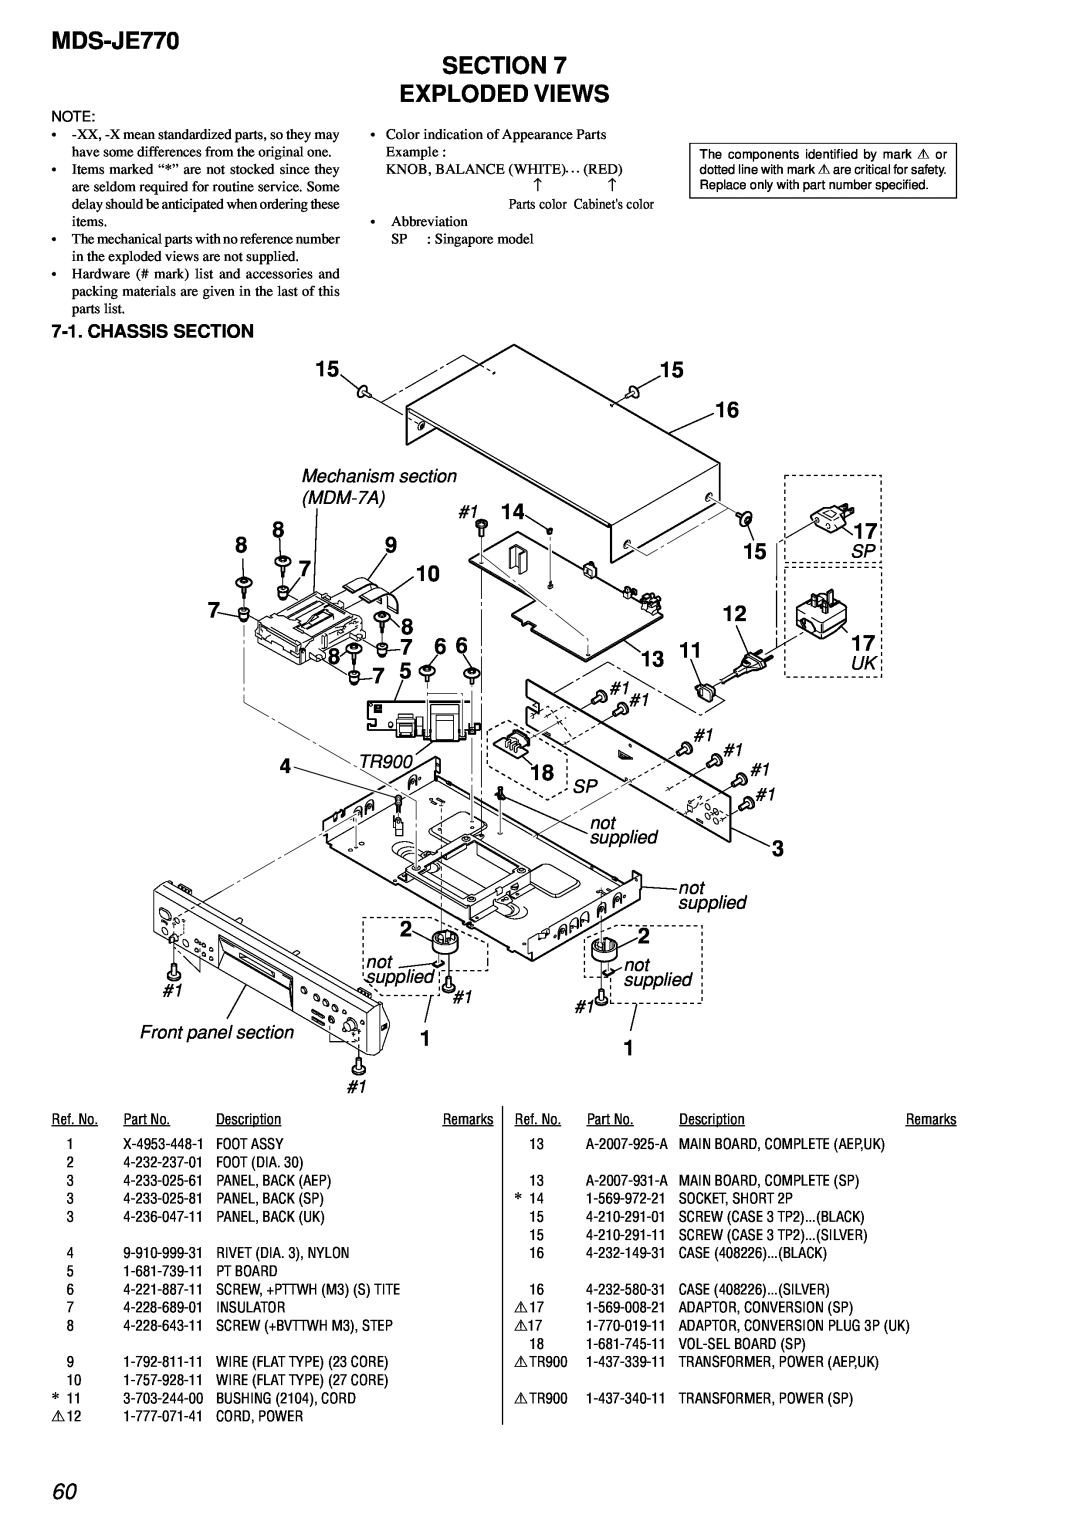 Sony MDS-JE770 specifications Section Exploded Views, Chassis Section 